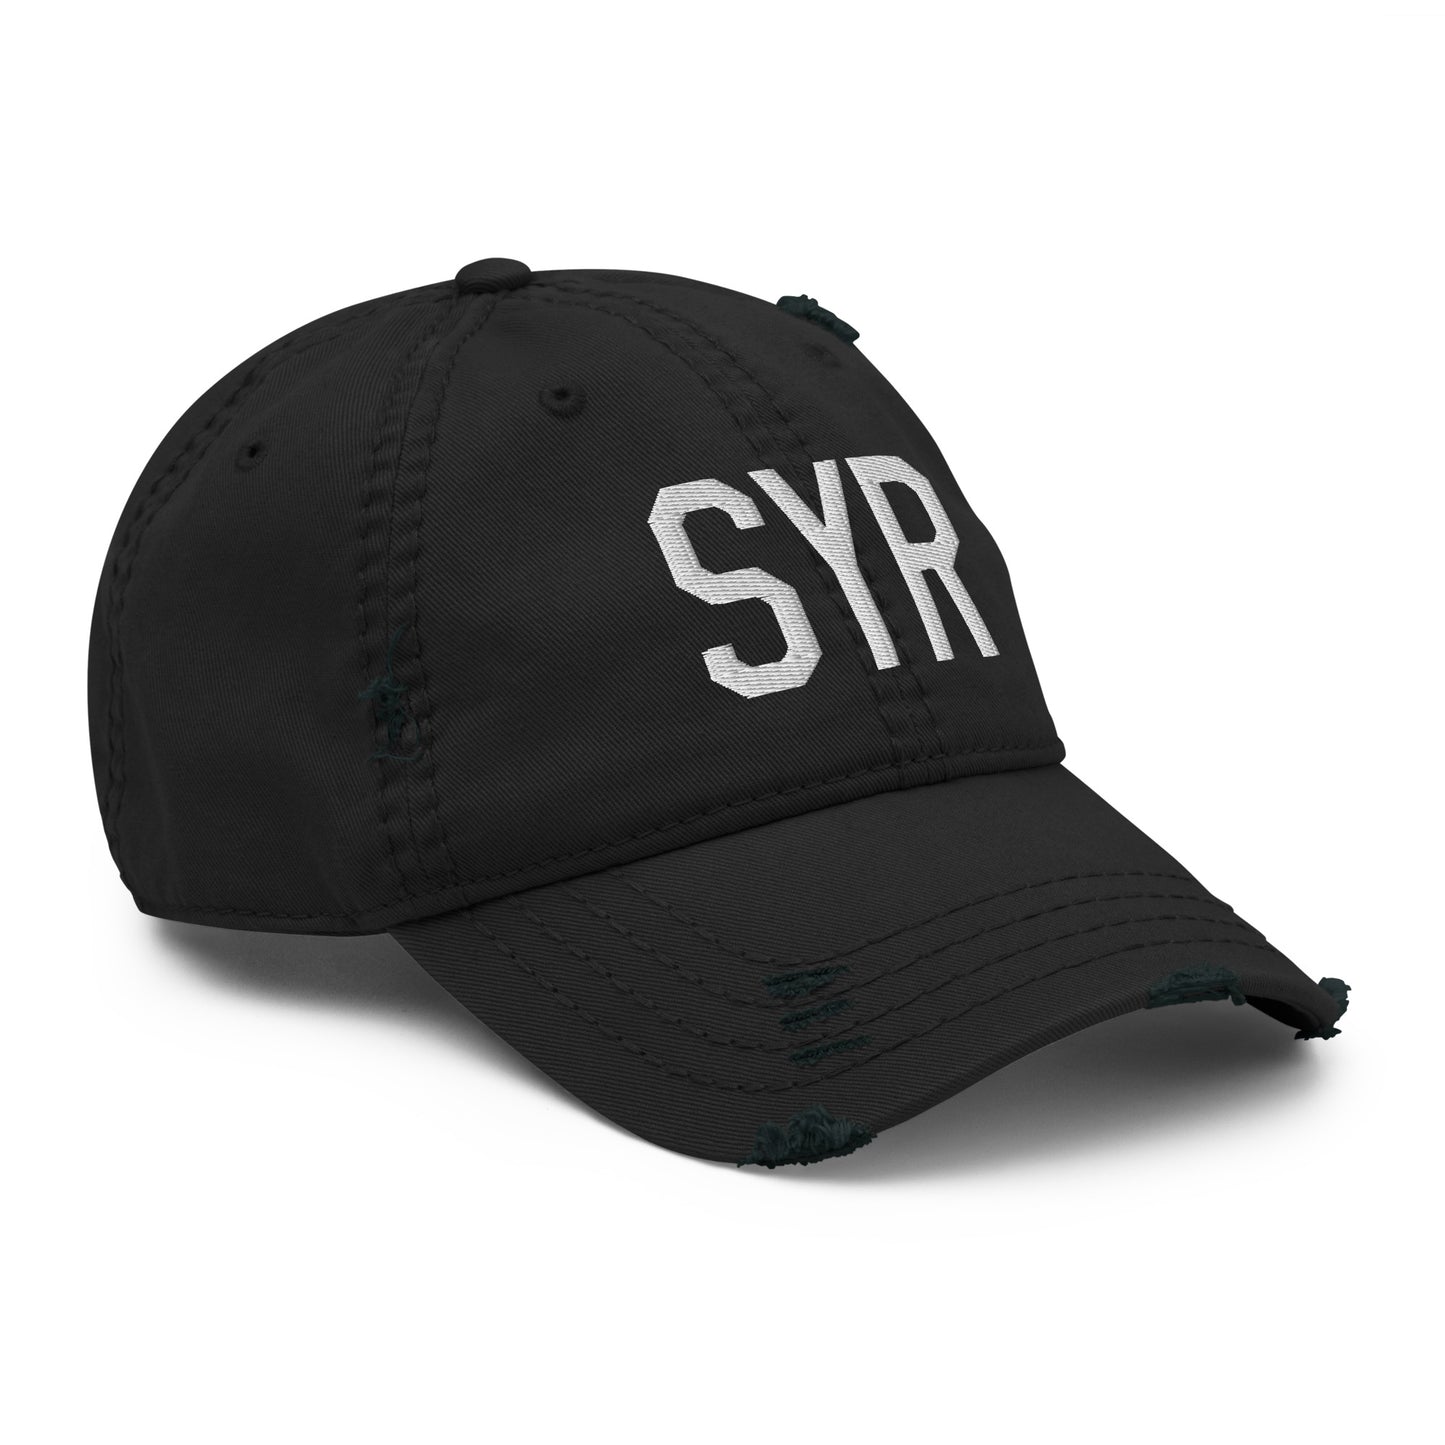 Airport Code Distressed Hat - White • SYR Syracuse • YHM Designs - Image 12